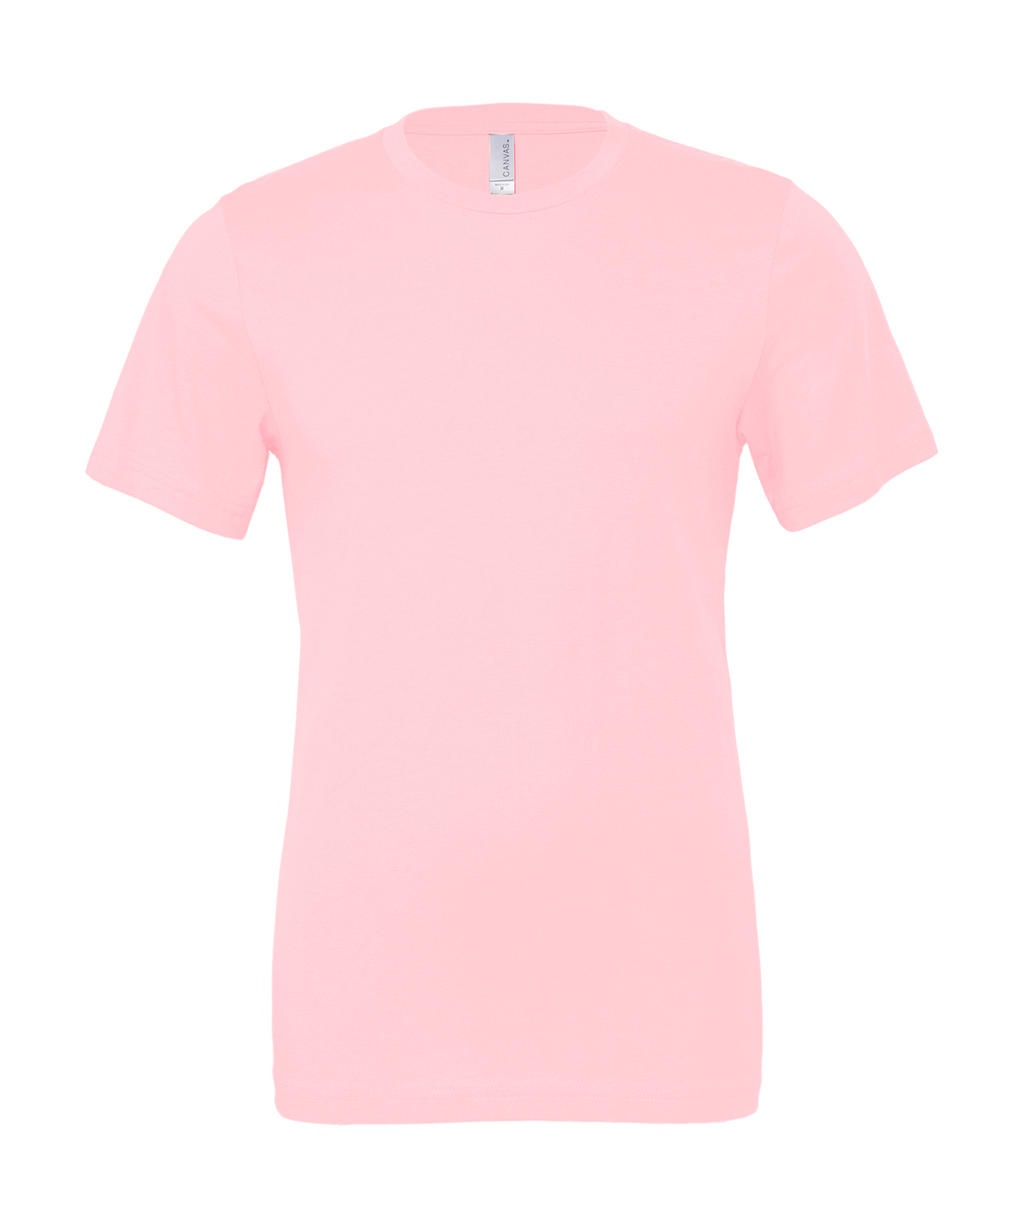  Unisex Jersey Short Sleeve Tee in Farbe Pink